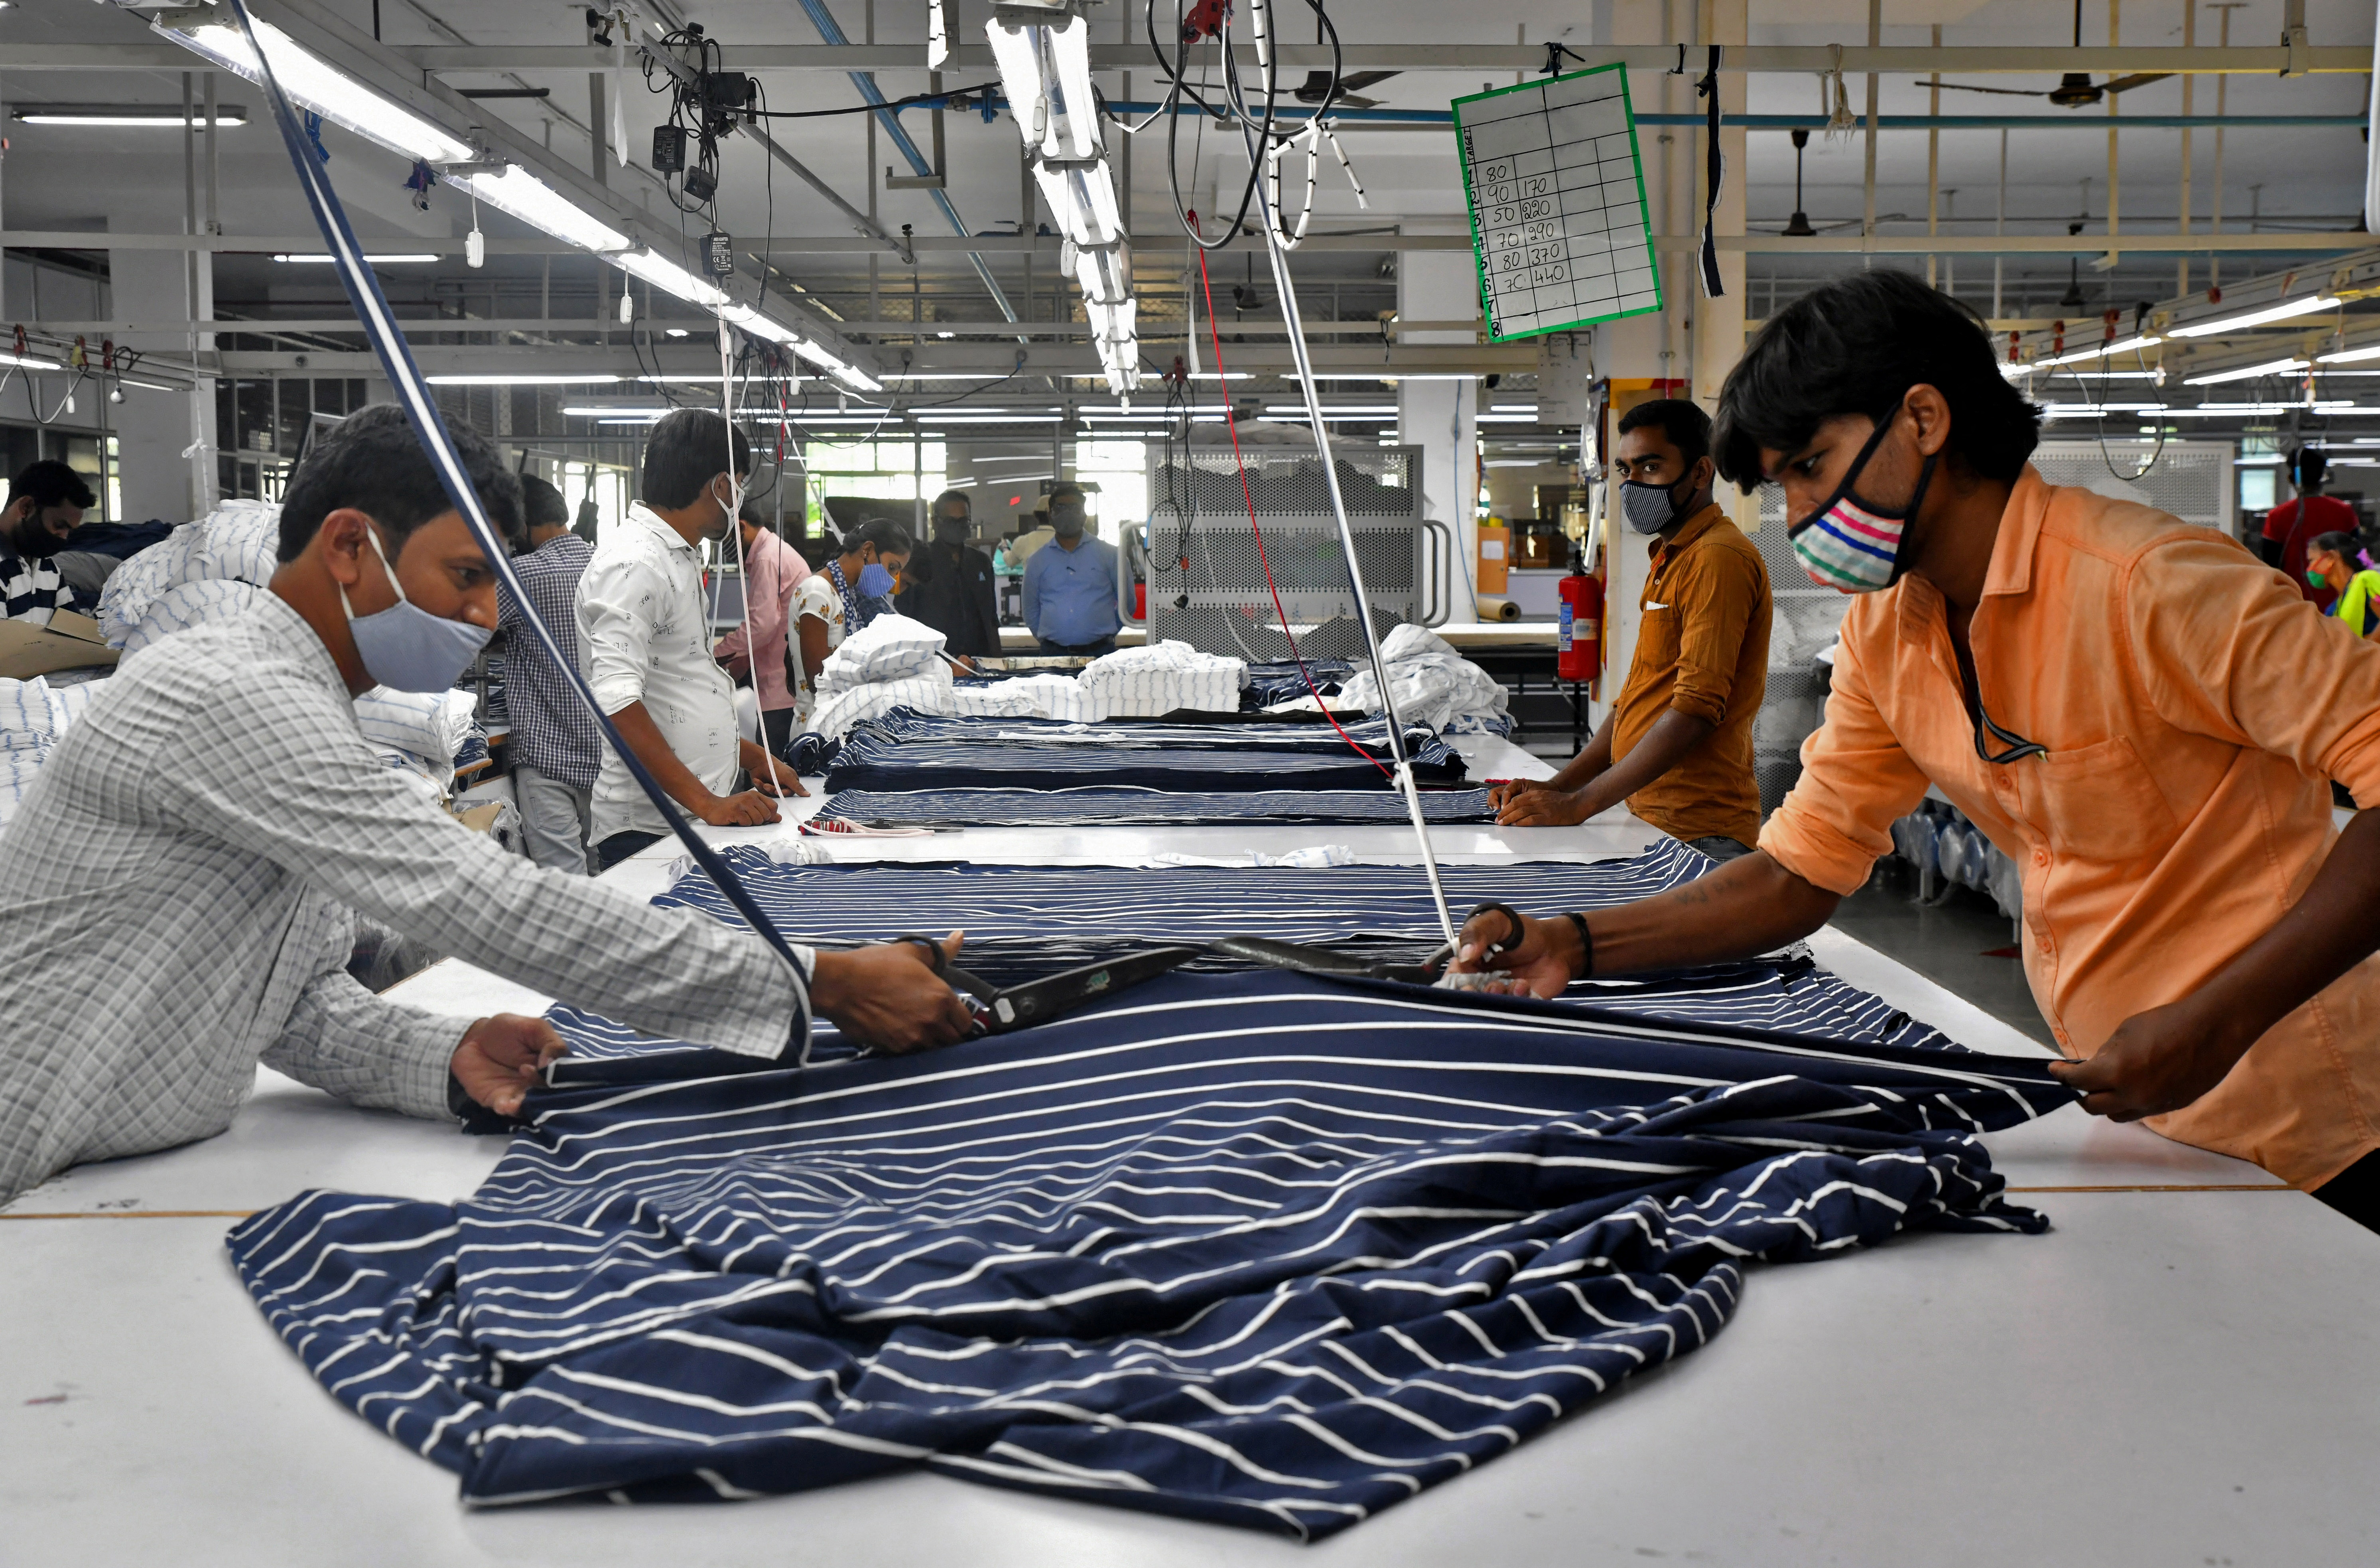 Focus: India's textile industry revs up, giving hope on jobs for